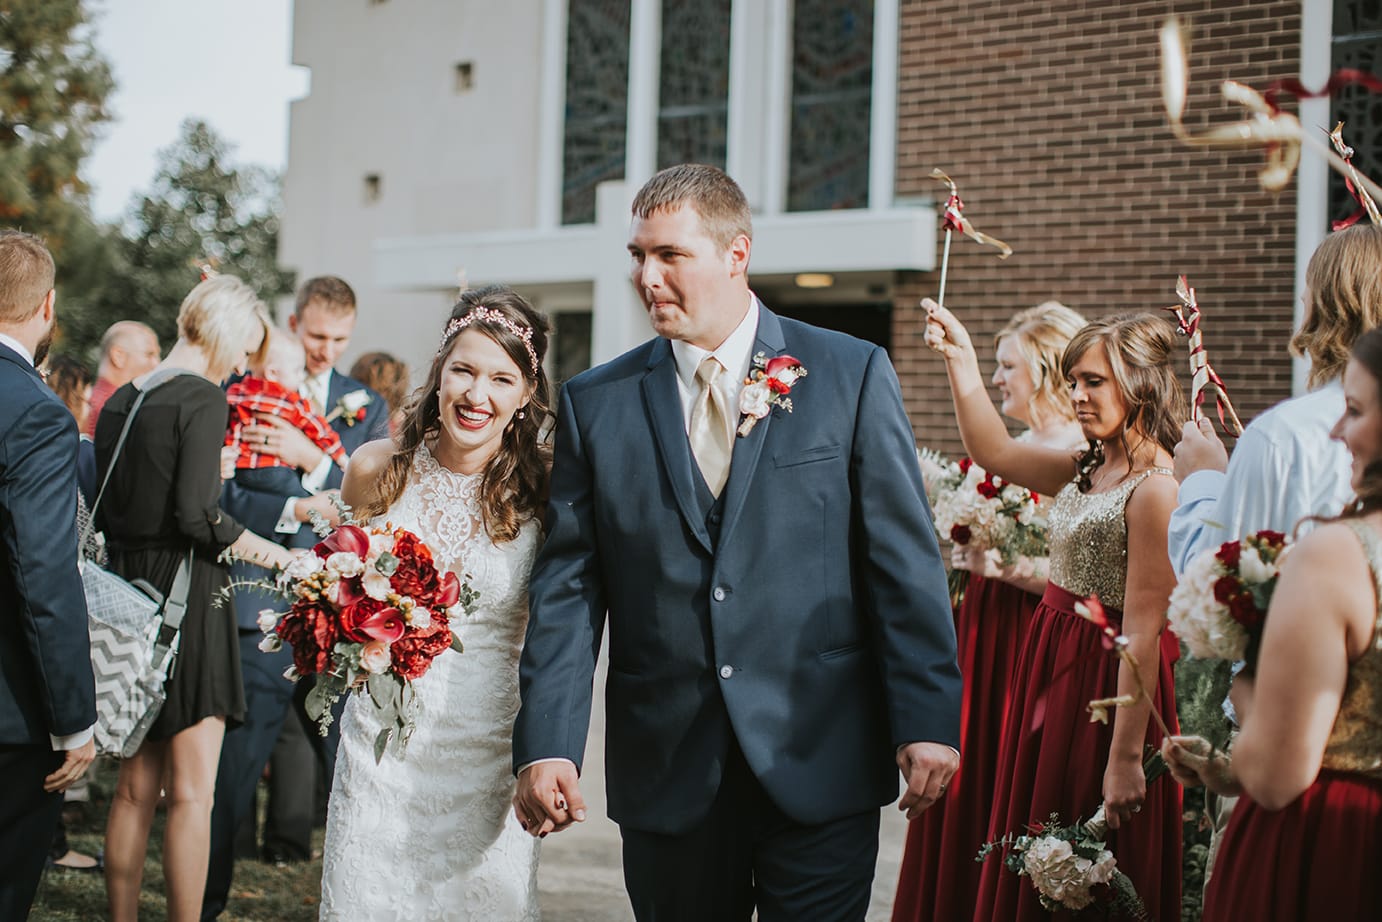 Fall Wedding with Retro-Modern Details - Midgley Bride is wearing Winifred by Sottero and Midgley